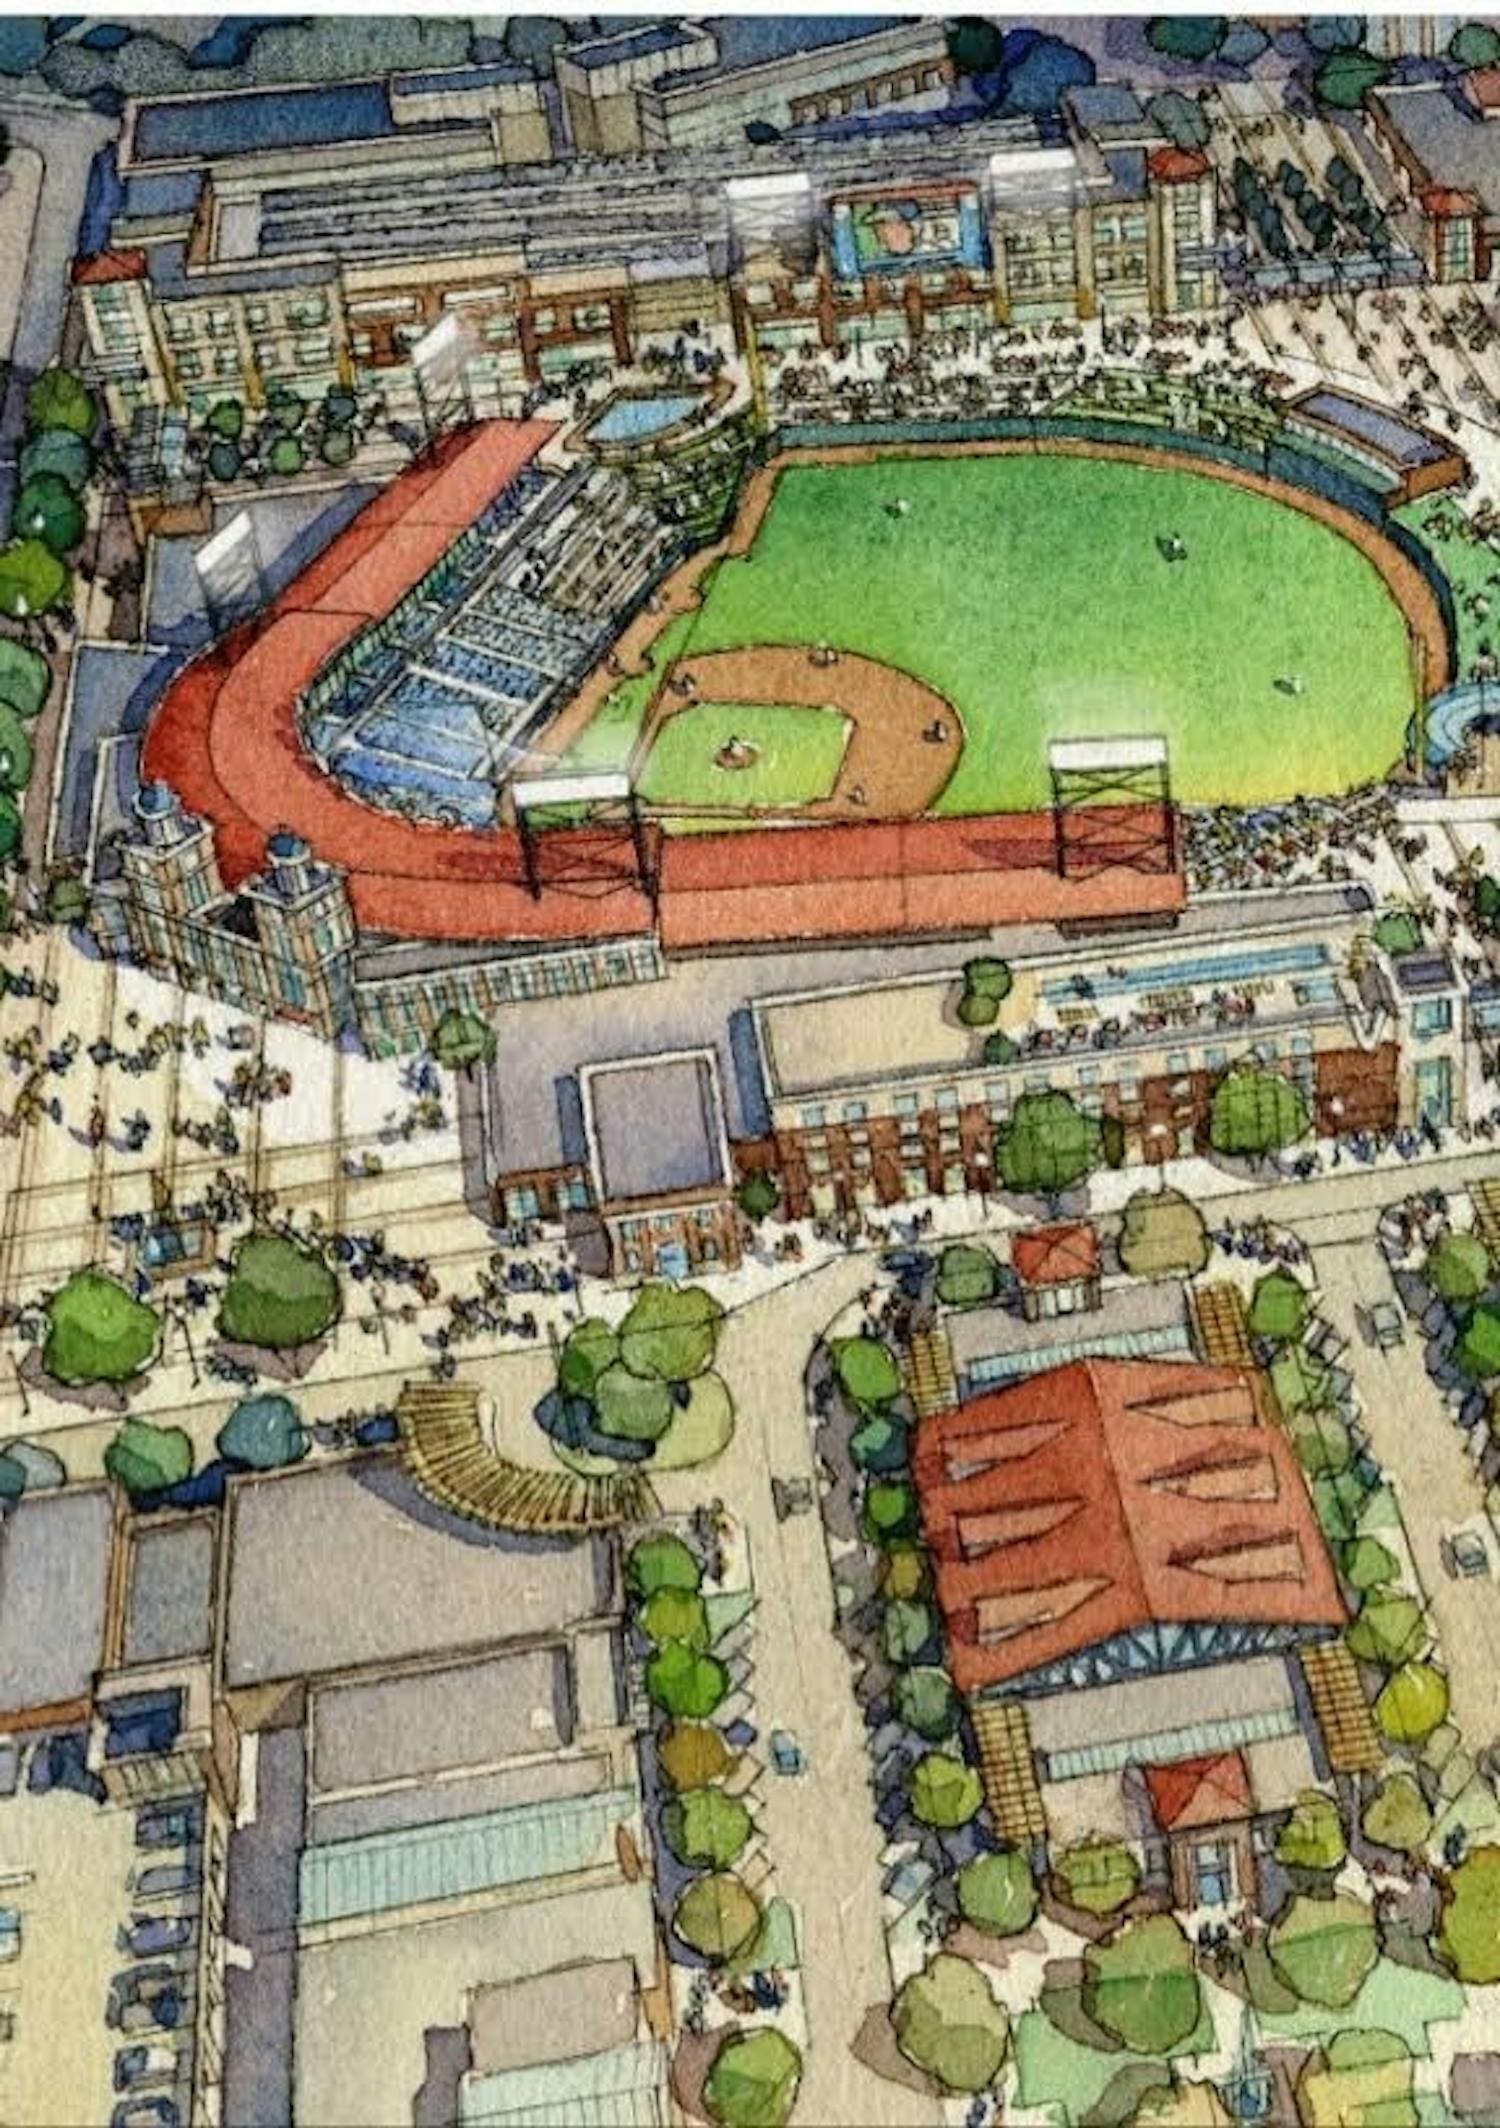 	City Council on Tuesday voted 4-3 to build a minor-league baseball stadium on Bull Street. The project will require the city to take on $29 million in debt.